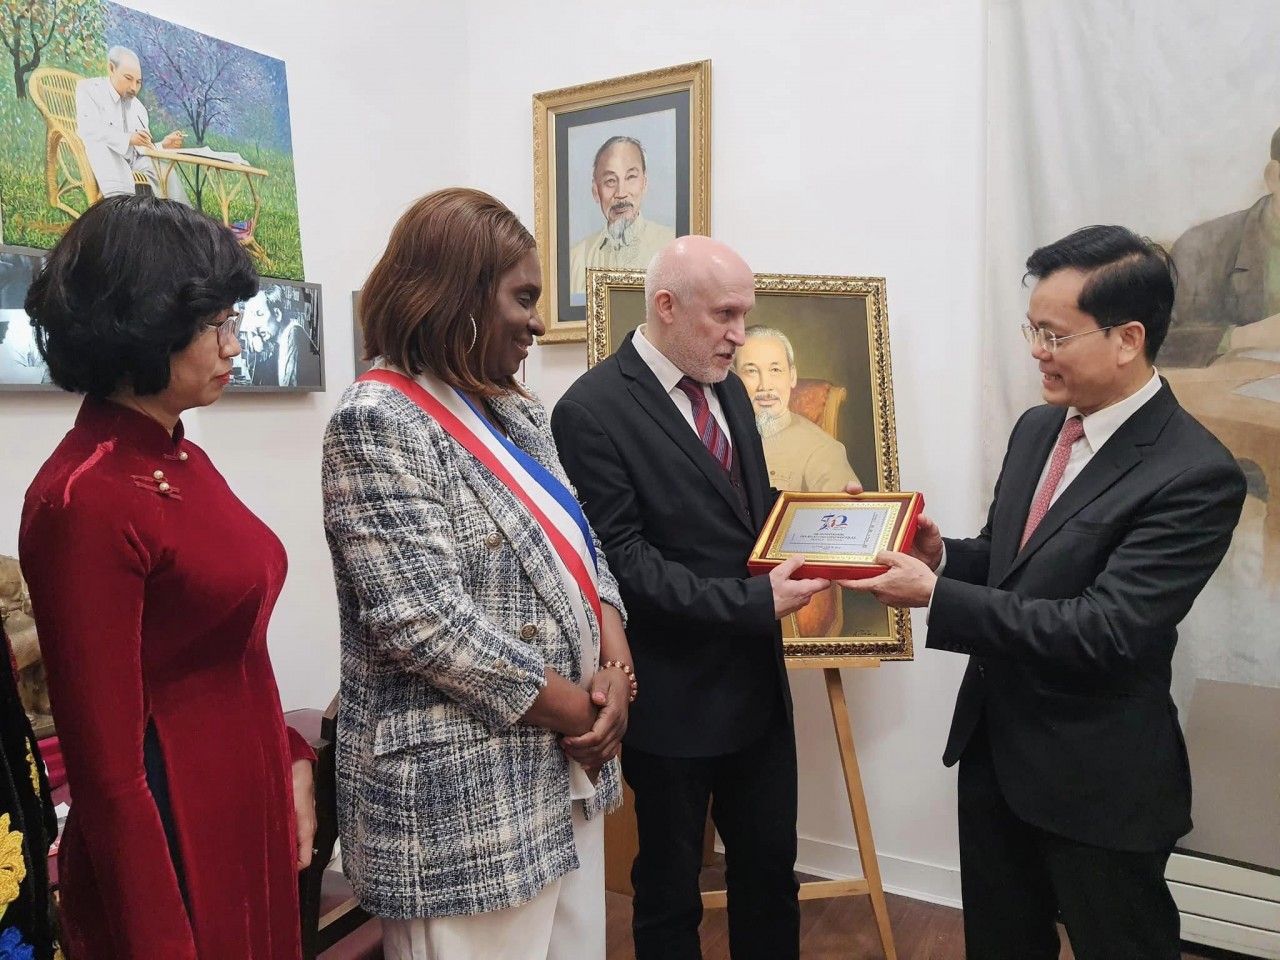 Deputy Foreign Minister Ha Kim Ngoc and the Embassy delegation visit the museum space about Karl Max Exhibition and the progressive human values of the French revolution 1789.